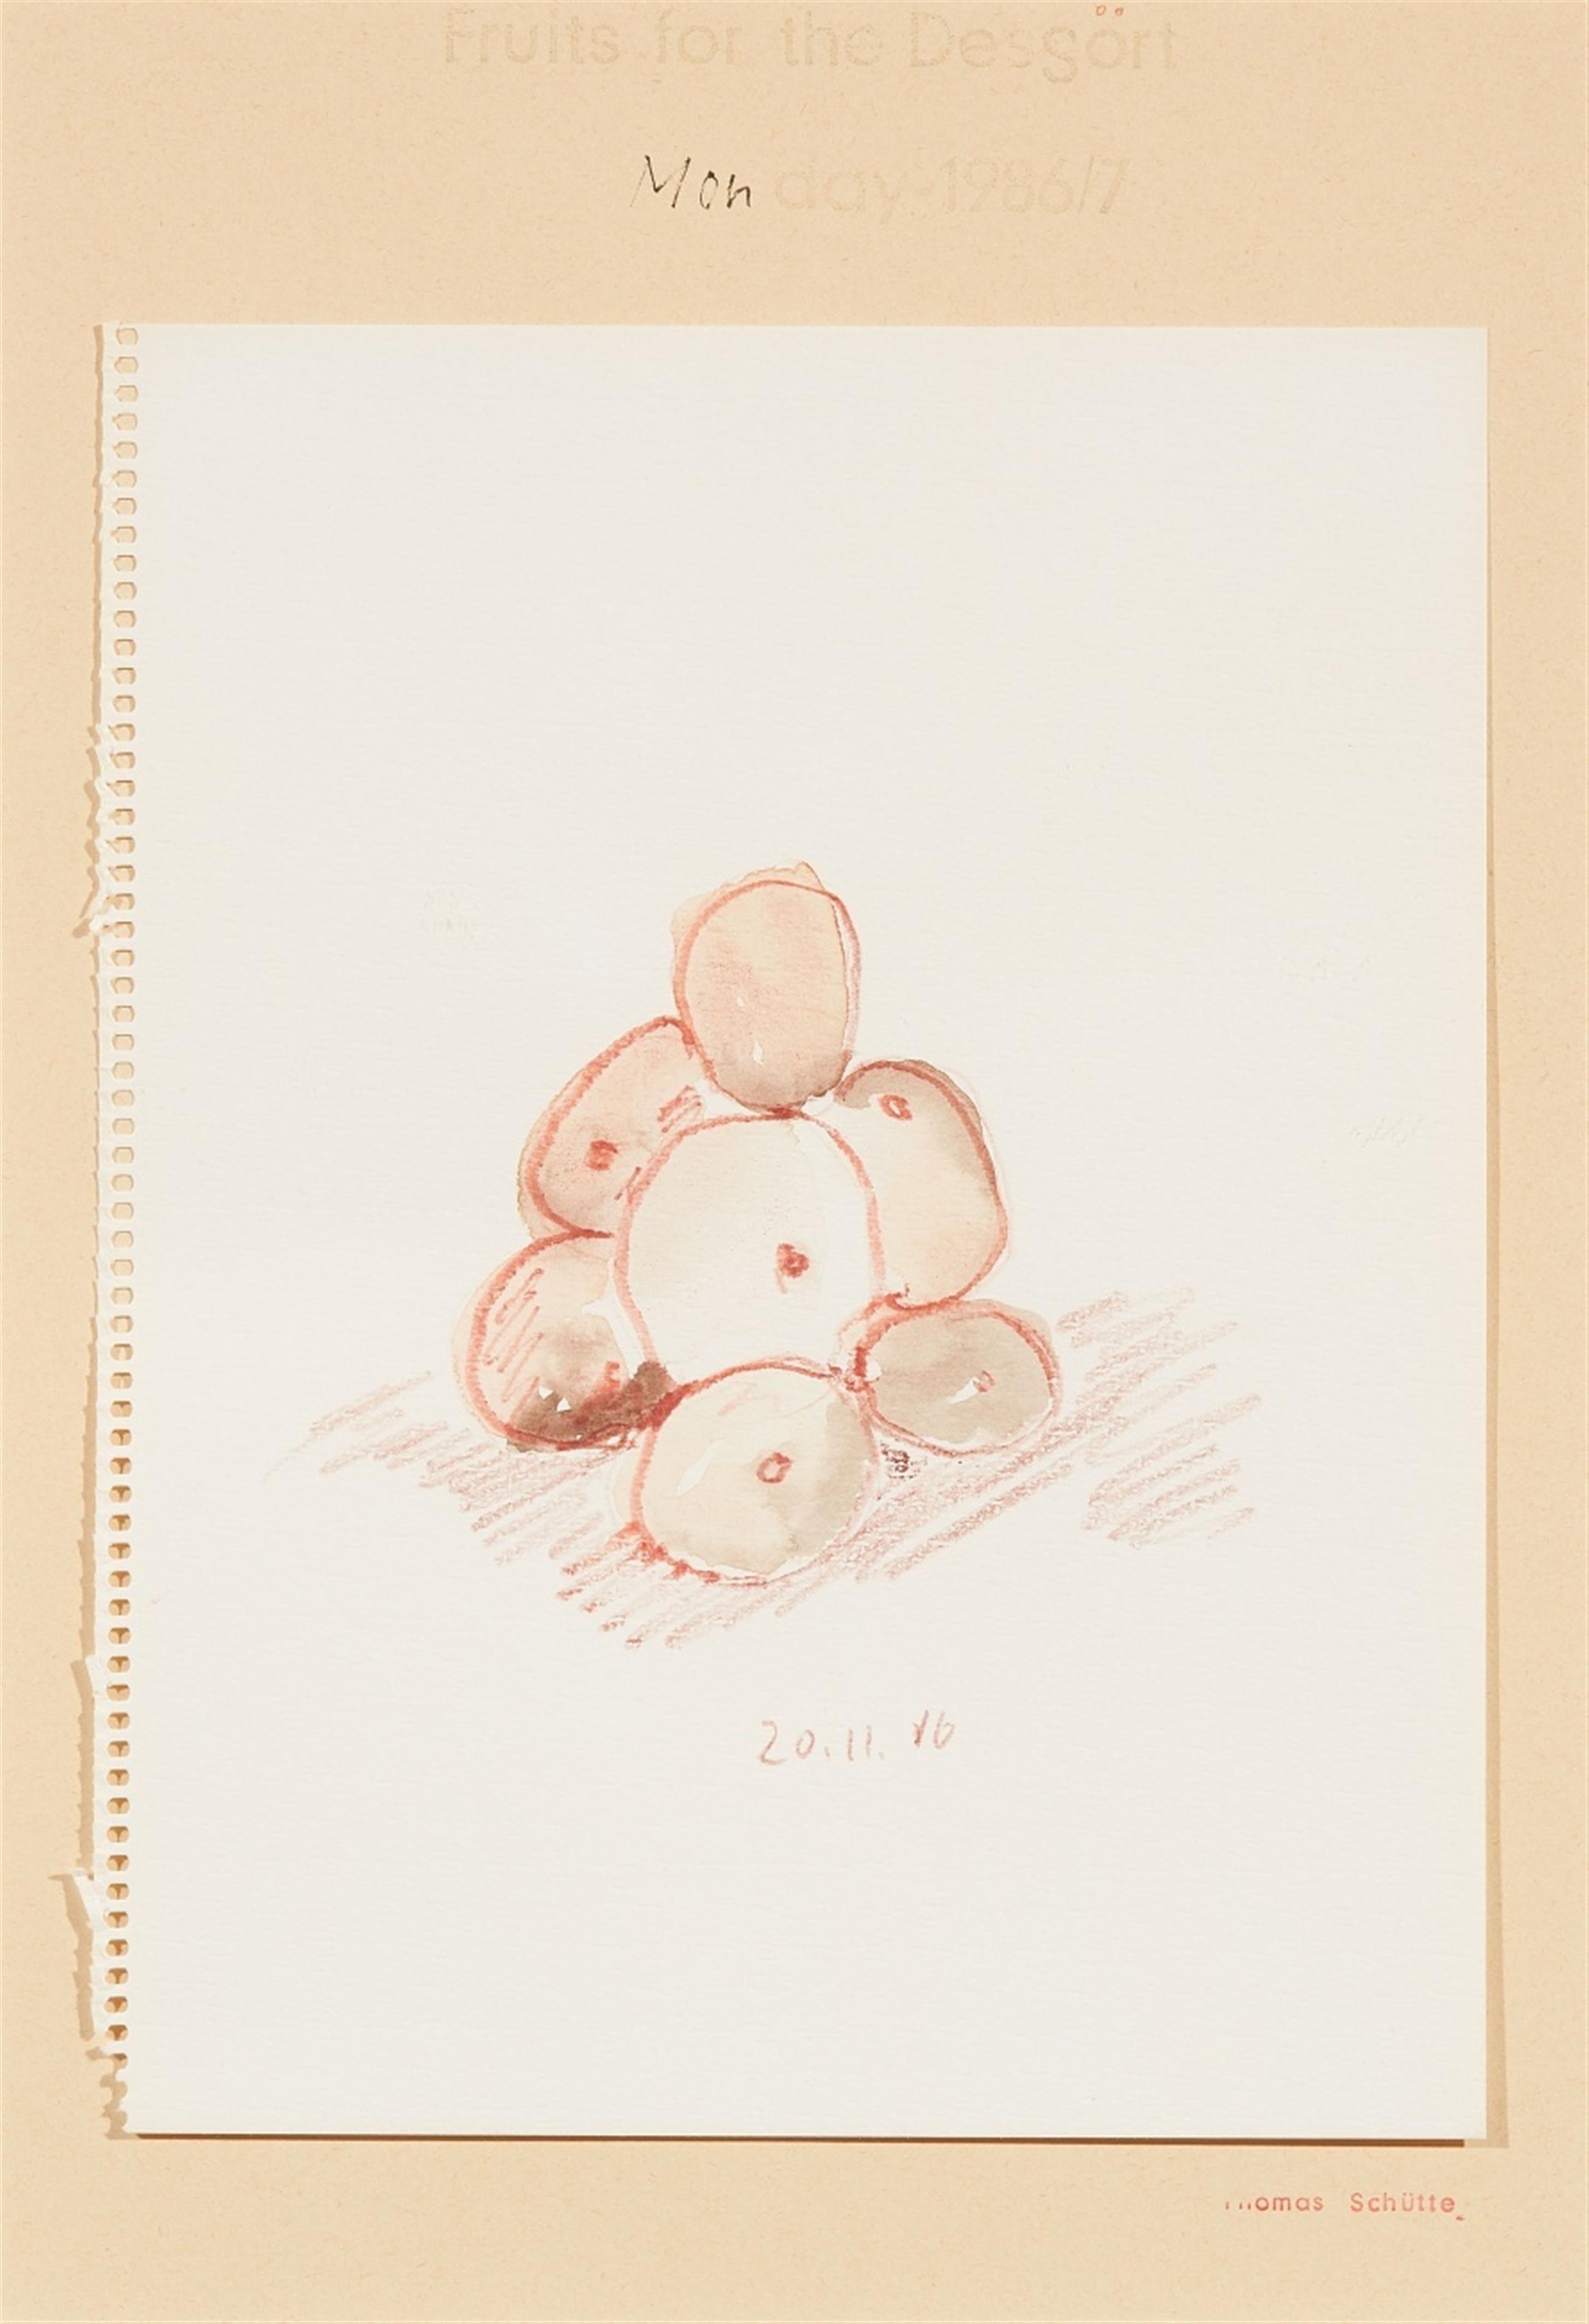 Thomas Schütte - Ohne Titel (from: Fruits for the Dessört) - image-1